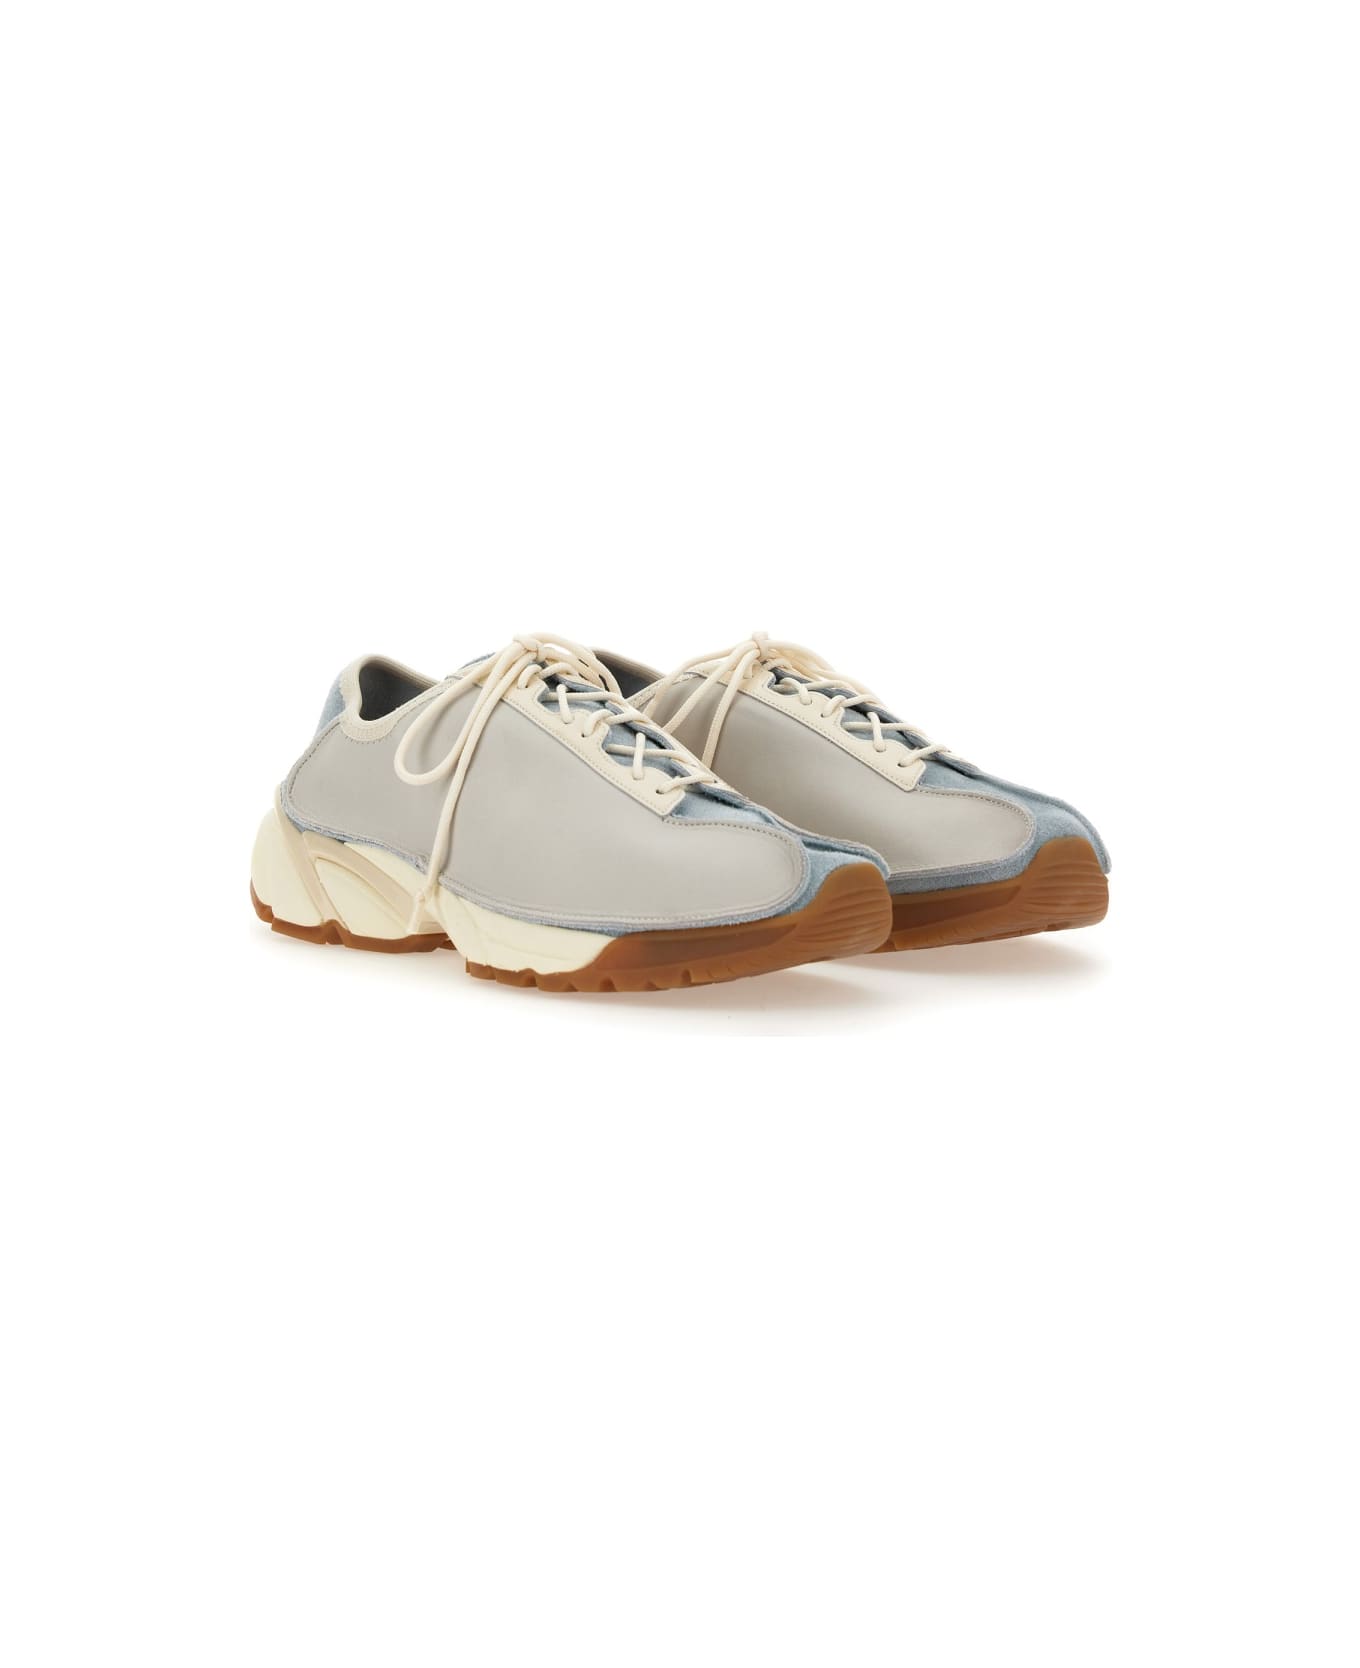 Our Legacy "klove" Sneaker - BLUE